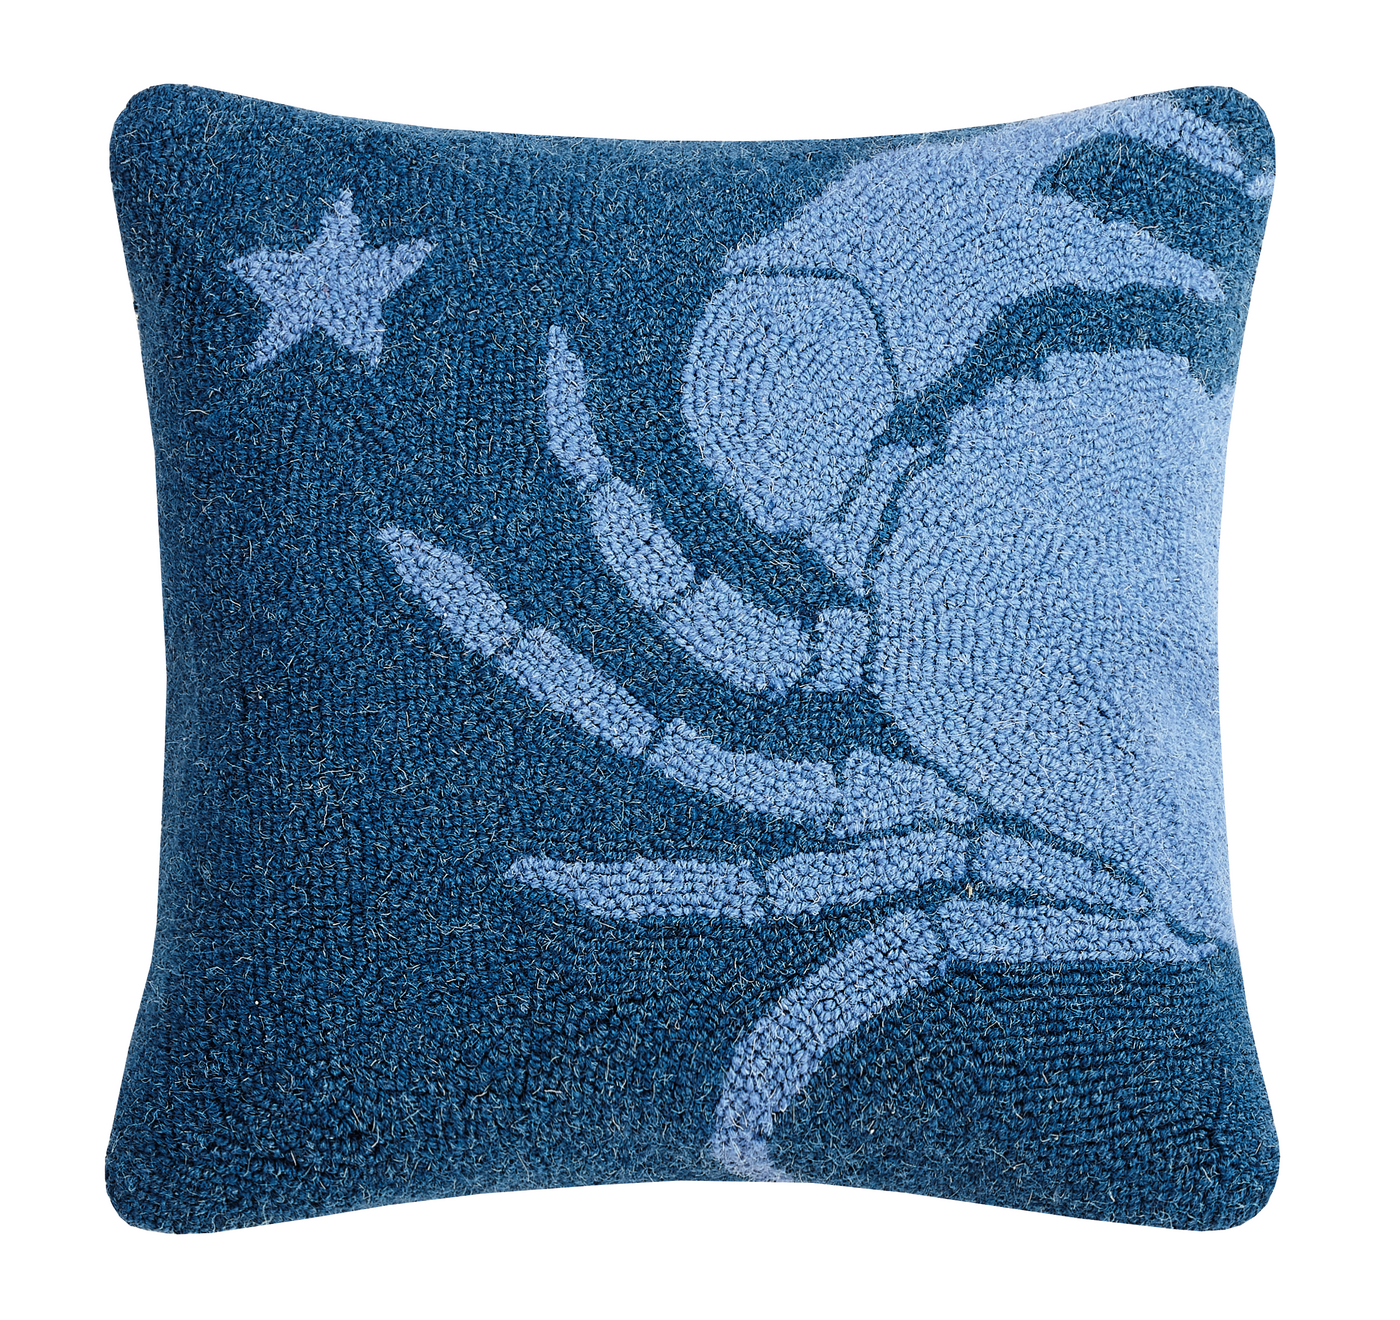 Blue Star Crab Hooked Pillow